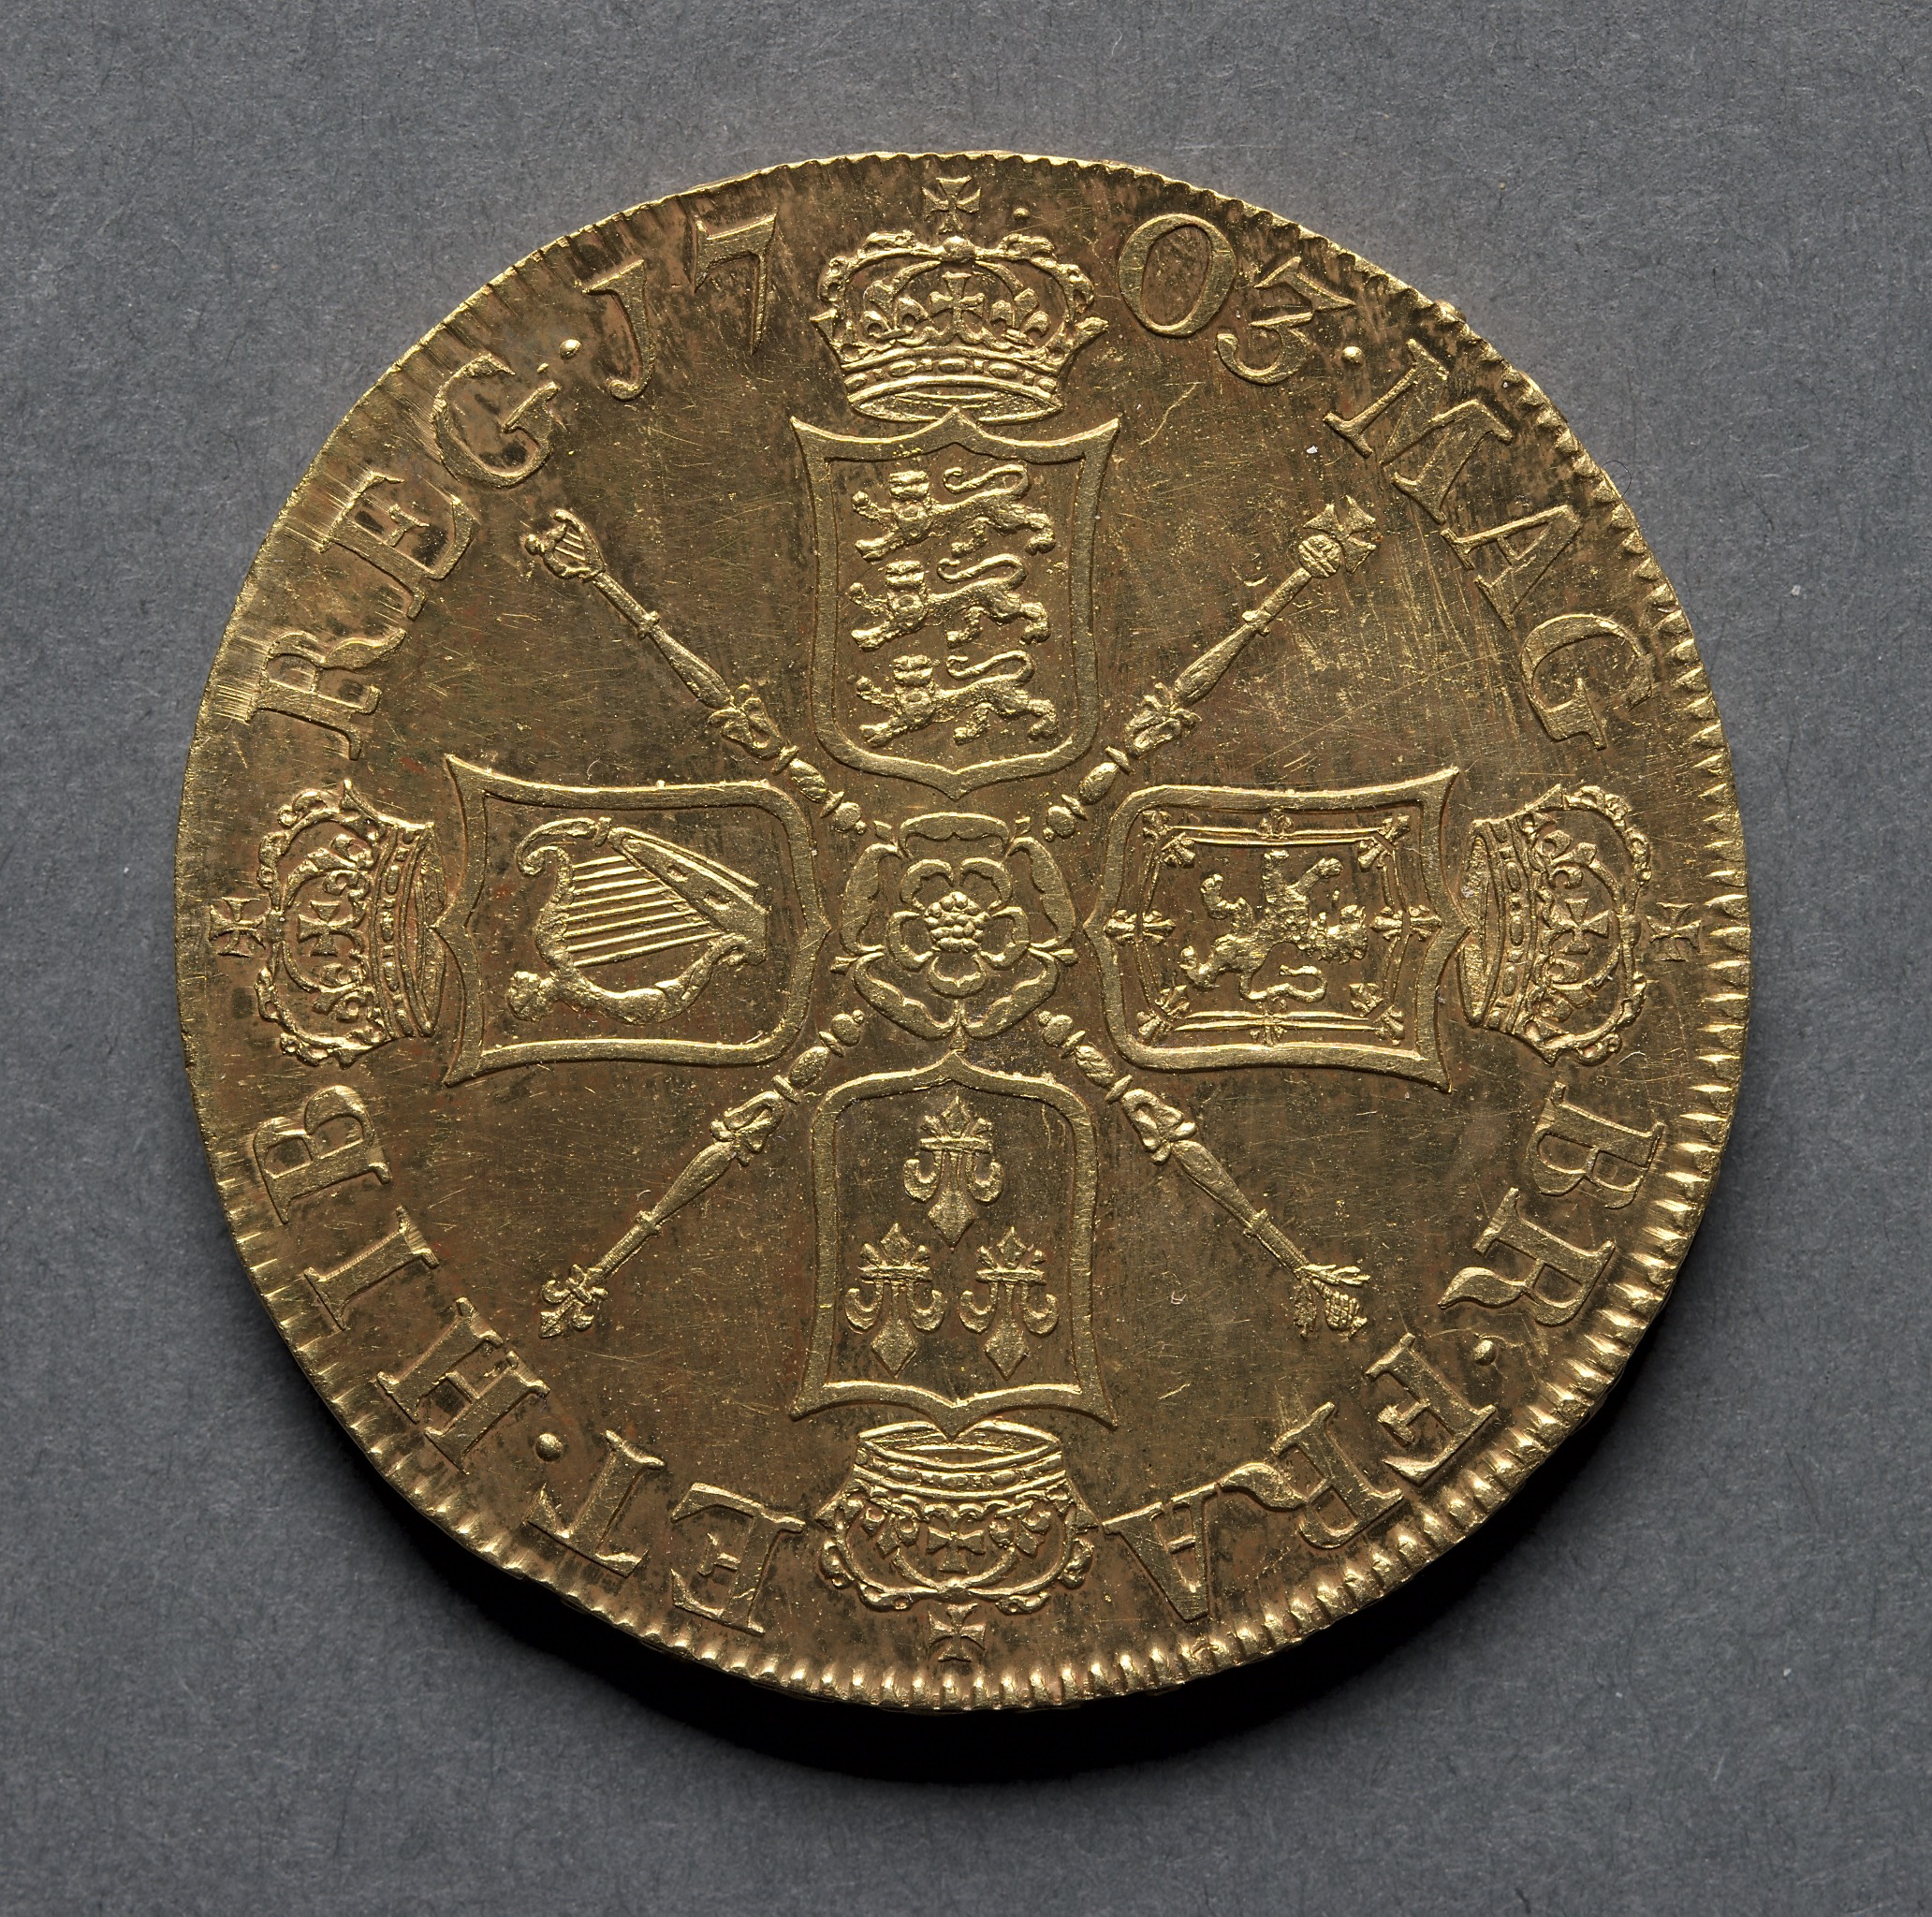 Five Guineas: Shields and Rose (reverse)